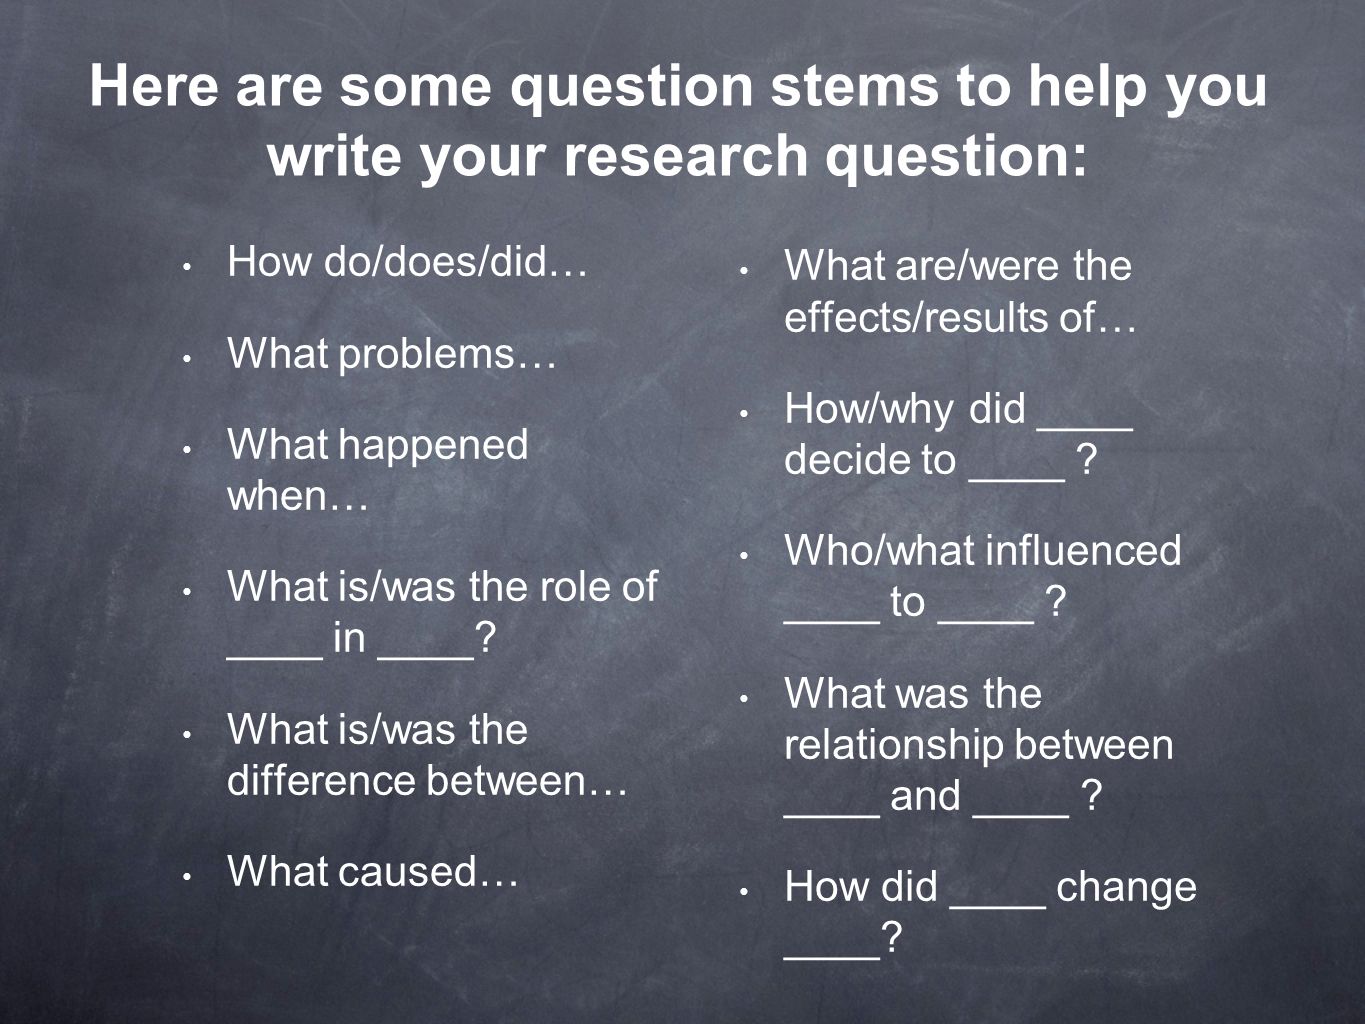 Here are some question stems to help you write your research question: How do/does/did… What problems… What happened when… What is/was the role of ____ in ____.